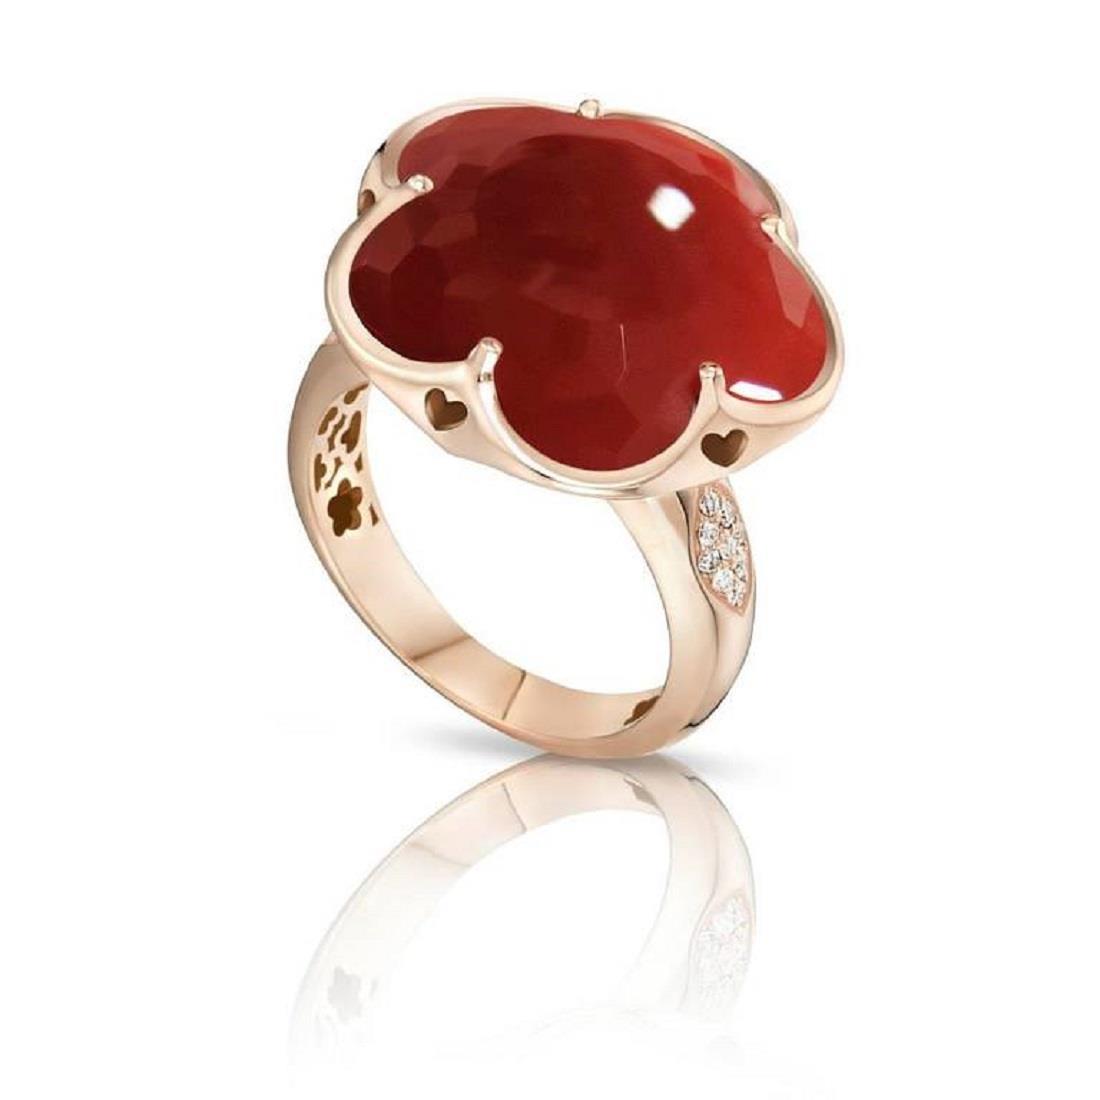 Flower Bon Ton ring in gold and diamonds with carnelian - PASQUALE BRUNI